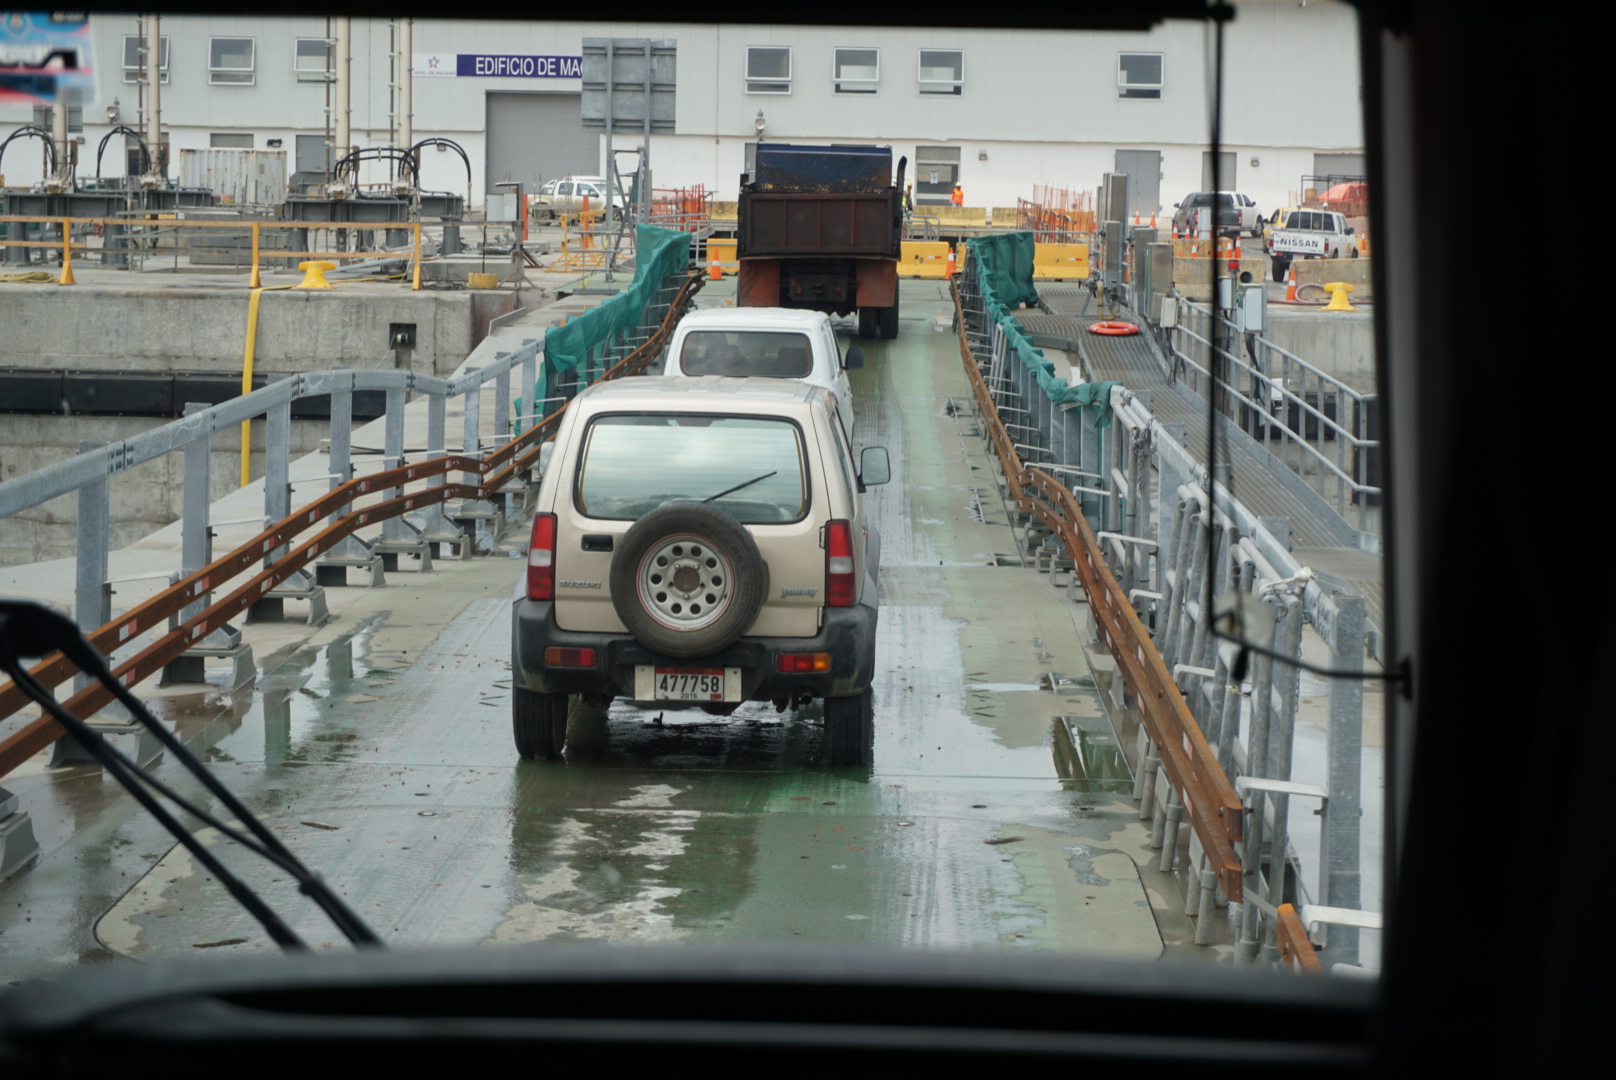 A unique opportunity - driving across the lock expansion project at Gatun, via a closed gate.